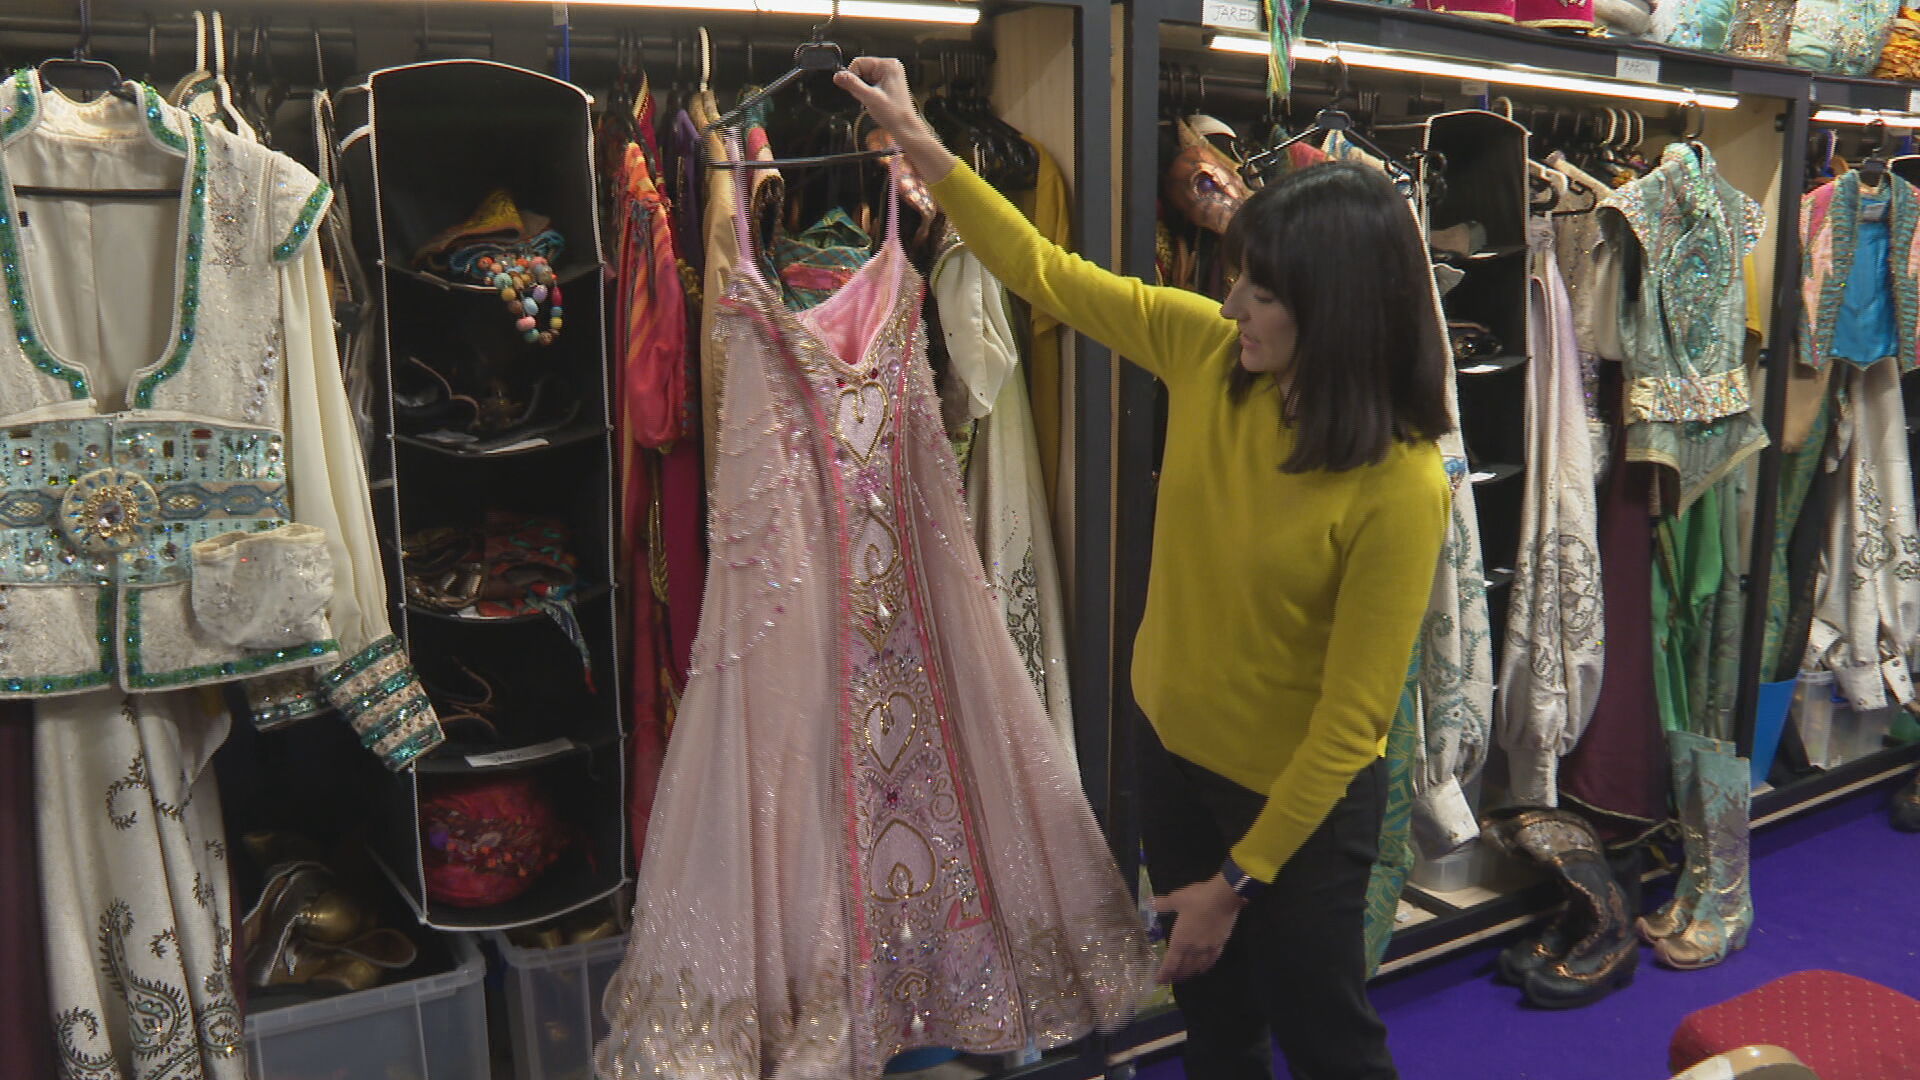 Backstage with Head of Wardrobe, Abigail Morgan, showing off the details of one of Jasmine's costumes.